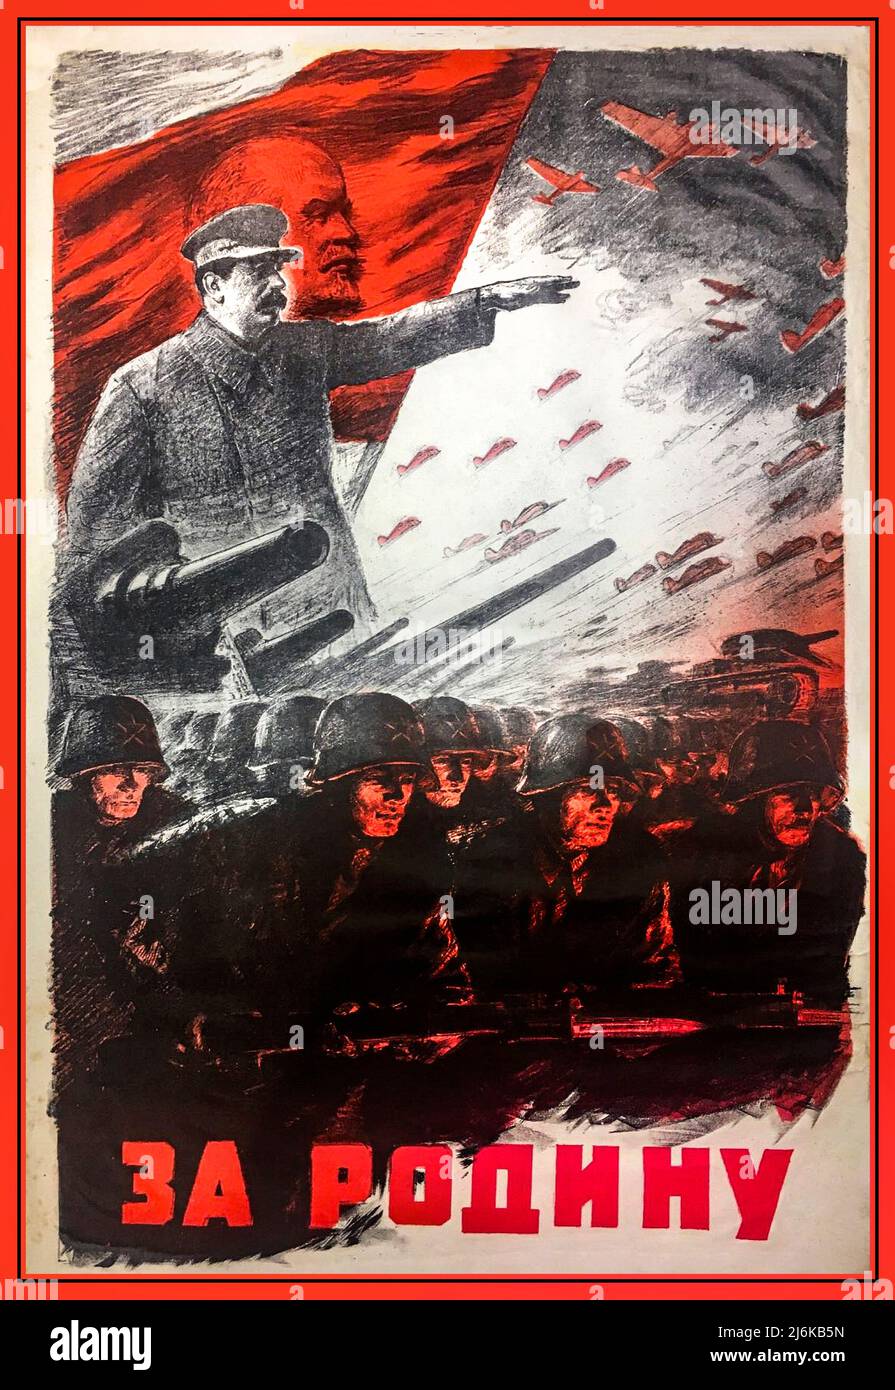 Stalin 1940s Russia WW2 Propaganda Poster with Joseph Stalin and Lenin on flag behind, urging his forces forward.  'For the Motherland' World War II Second World War Russia Soviet Union USSR Fighting Nazi  Germany aggression 1941 Stock Photo